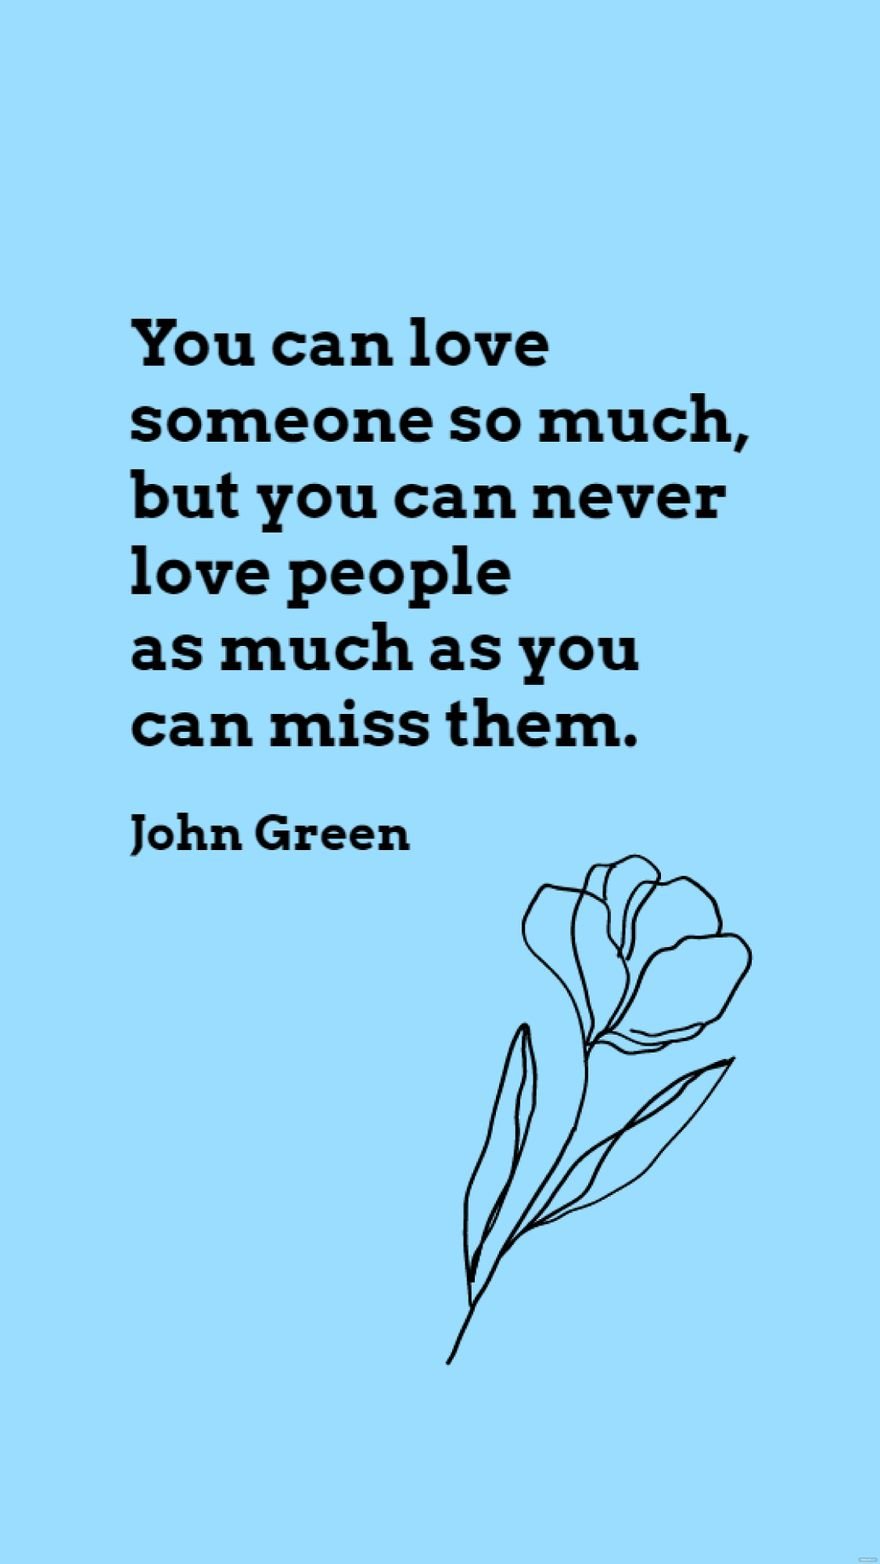 John Green - You can love someone so much, but you can never love people as much as you can miss them.